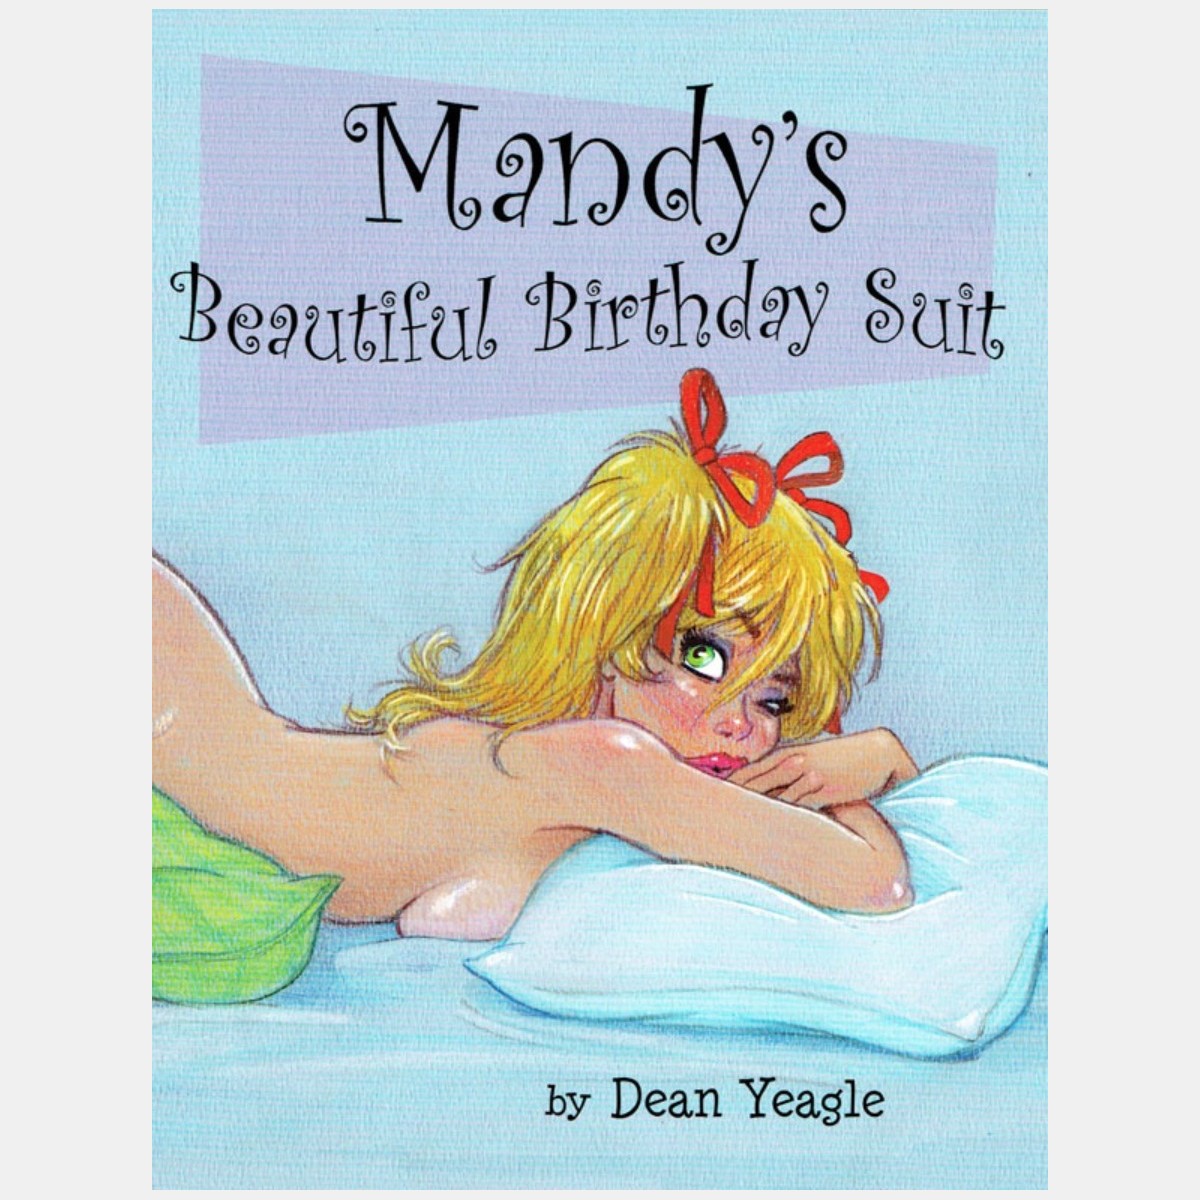 Dean Yeagle - Mandy's Beautiful Birthday Suit - Signed